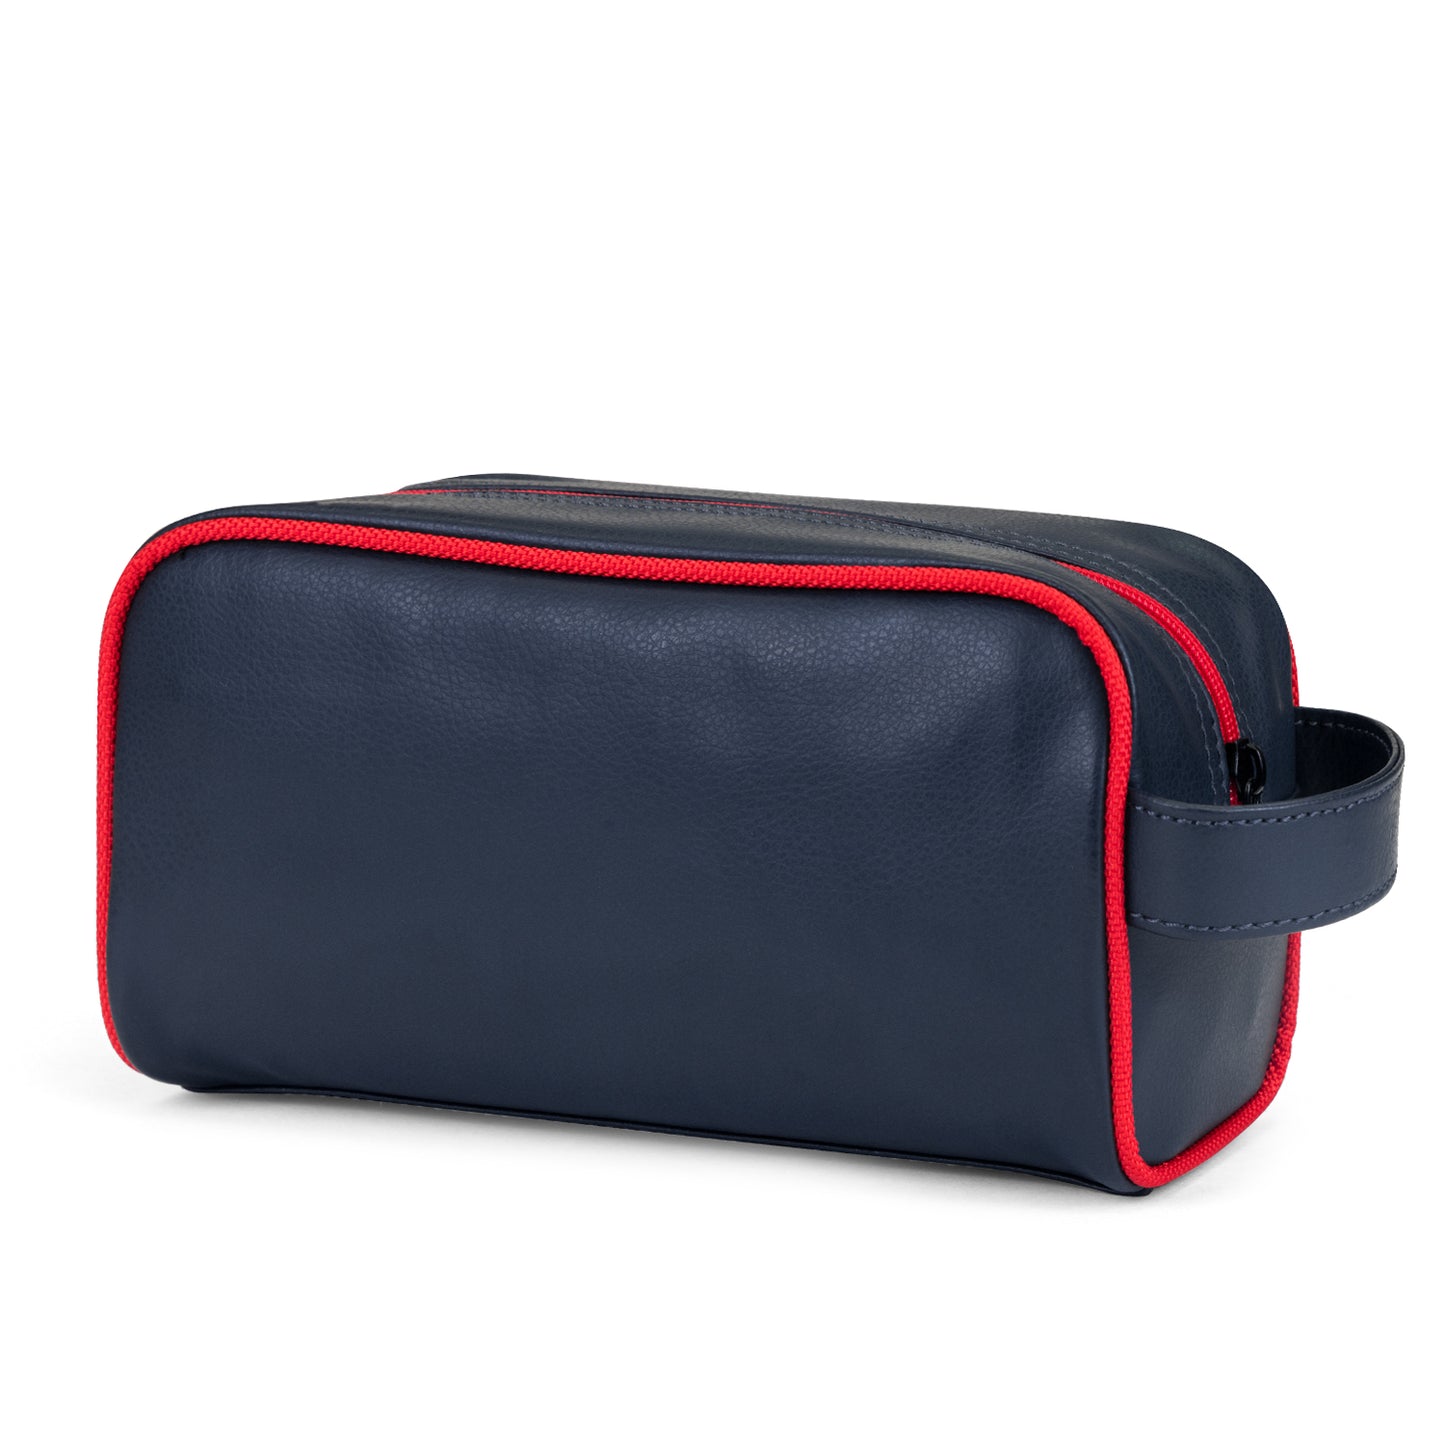 Blue and red water-resistant travel kit